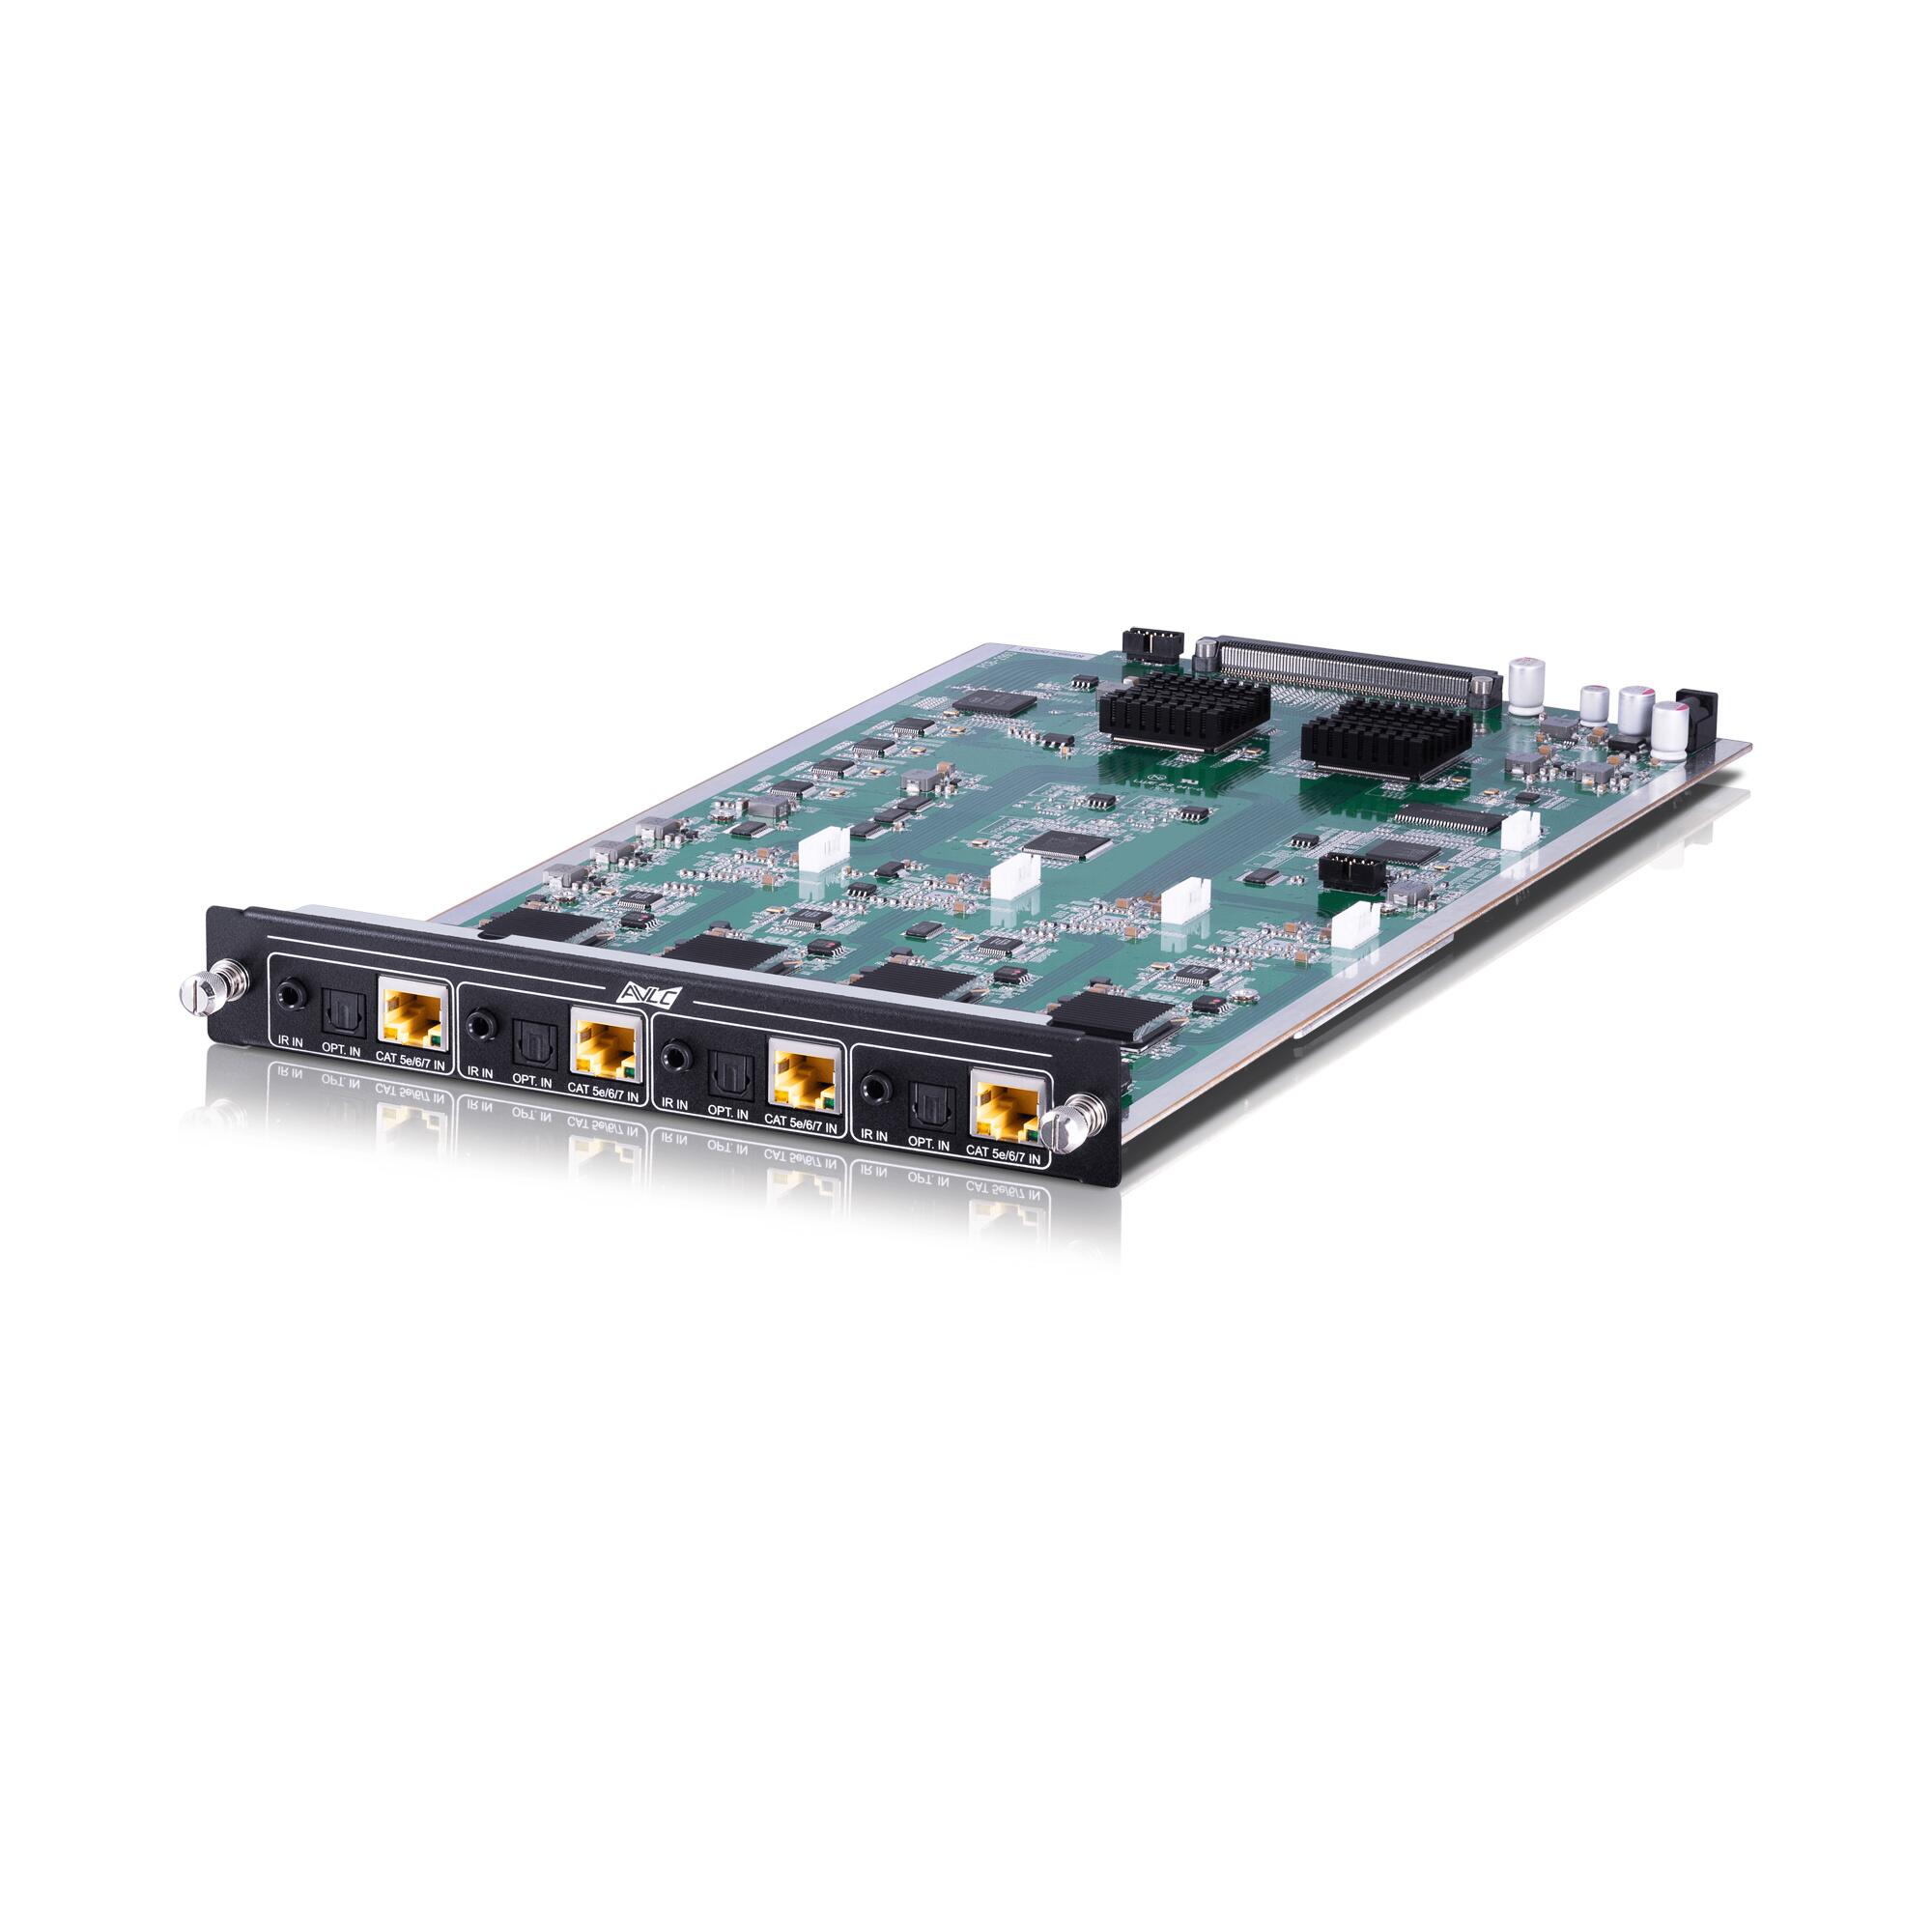 INX-2100-AVLC 4 Port HDBaseT 2.0 Output Receiver Card for the MODX-1616 - 4KHDR (Dolby Vision) AVLC, HDCP 2.2, 100m (70m 4K)